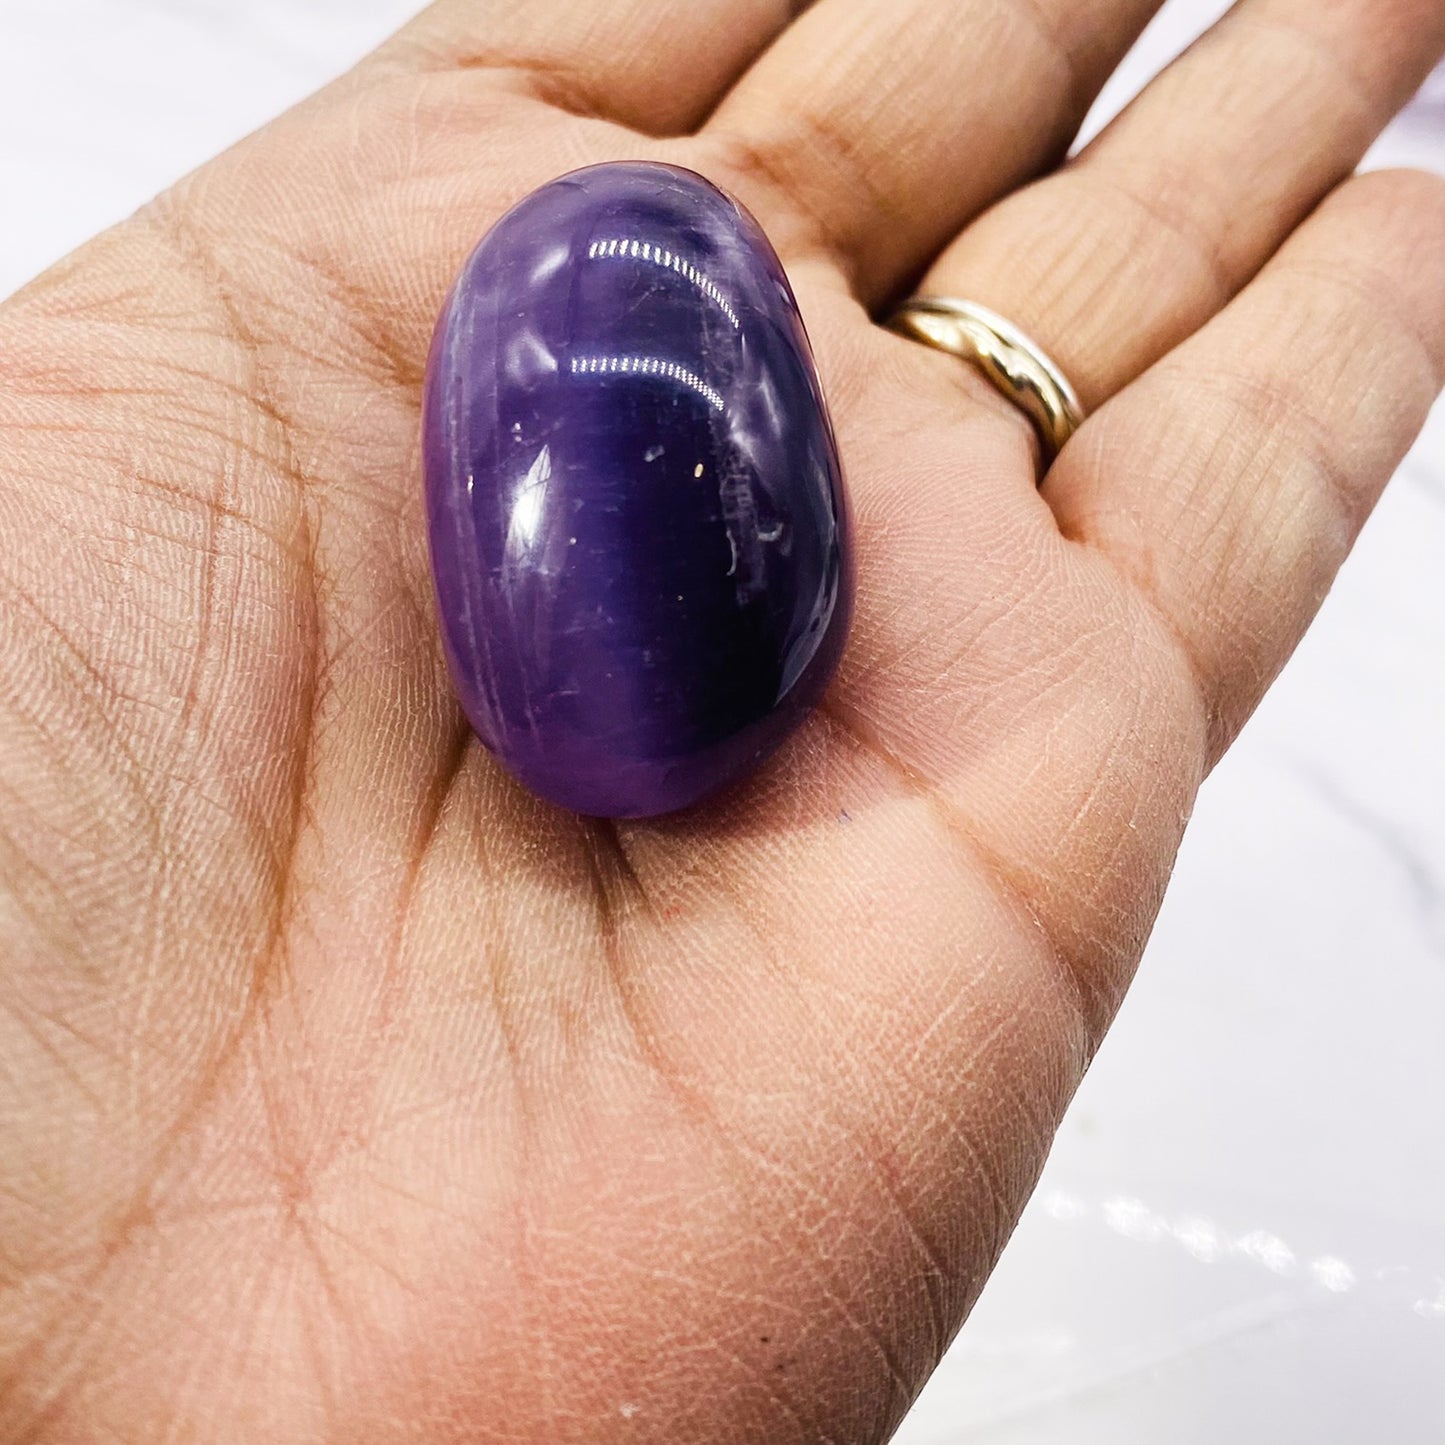 Amethyst Polished Crystal, Amethyst Egg, Pocket Stone, Amethyst Palm Stone Crystals, Stress Relieving Stone, Healing Crystal,  Crown Chakra